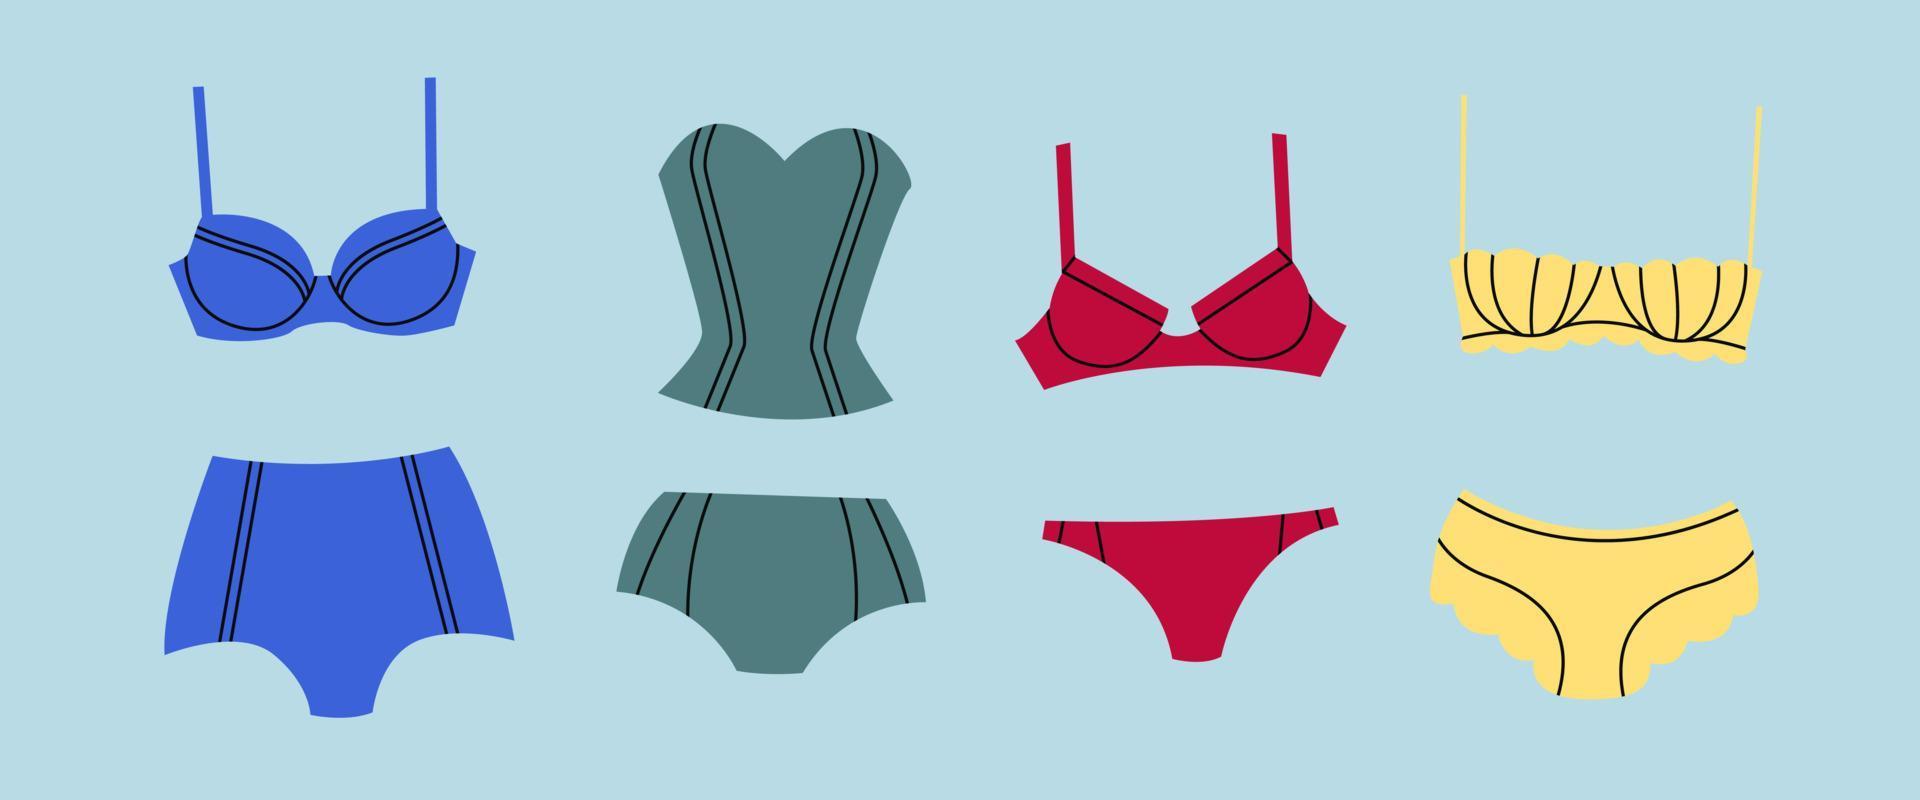 Types Of Women's Panties And Bras. Set Of Underwear. Vector Illustration  Royalty Free SVG, Cliparts, Vectors, and Stock Illustration. Image  139118422.